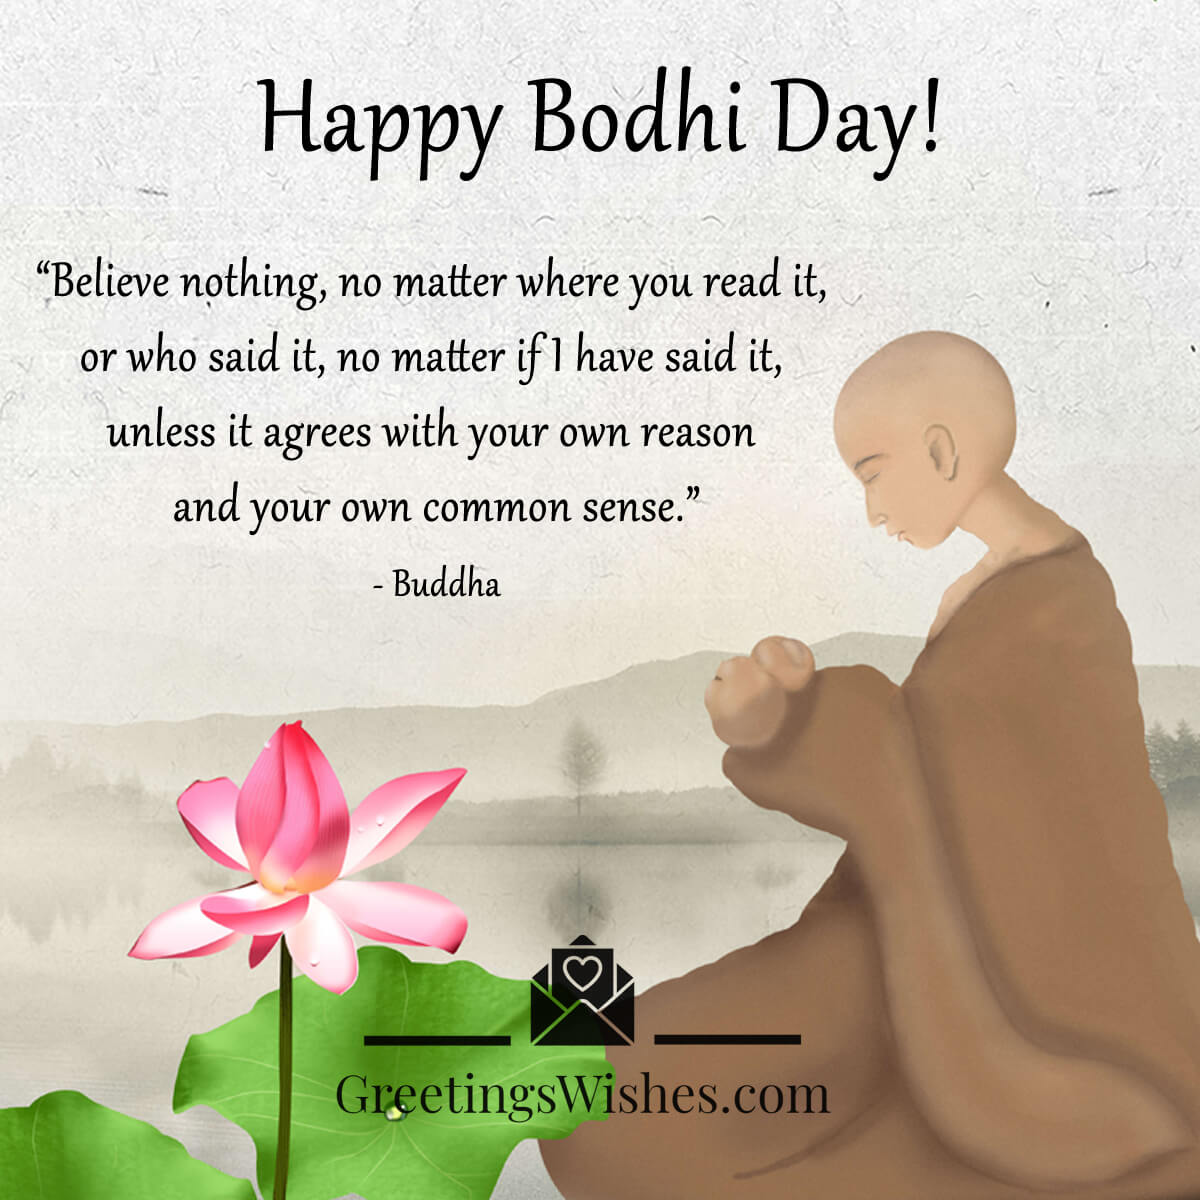 Happy Bodhi Day Wishes (8th December)